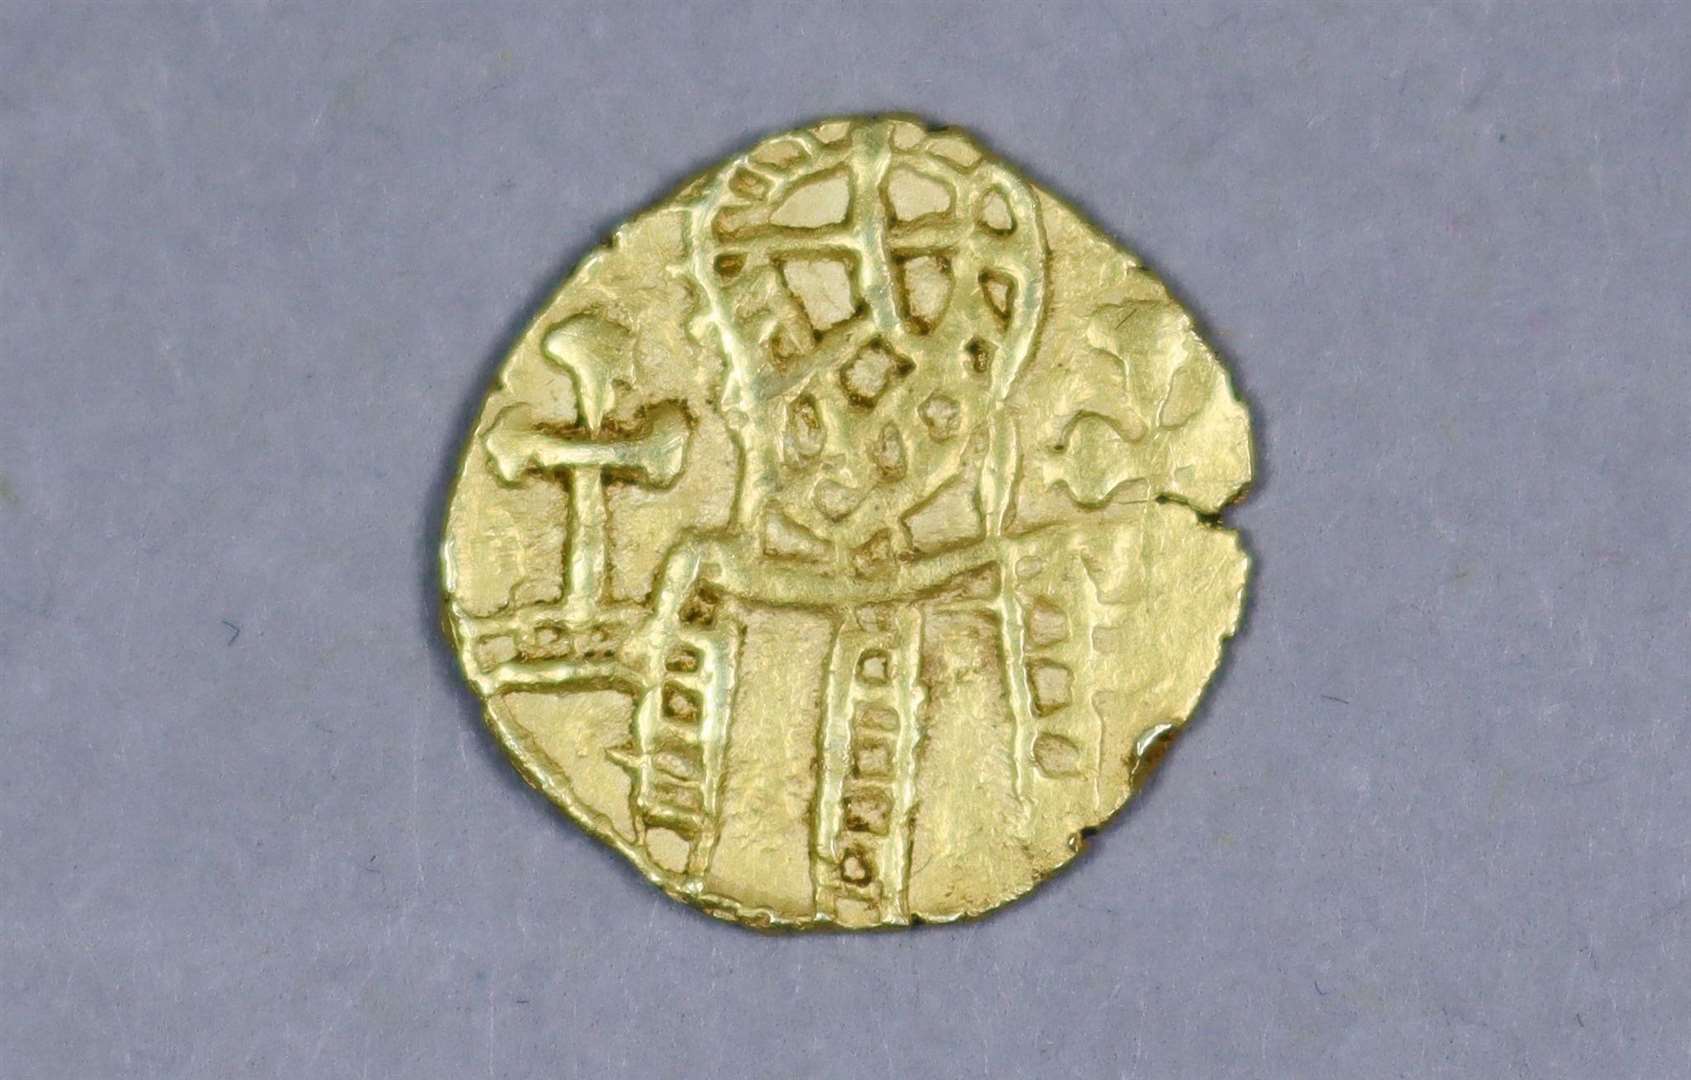 The most valuable coin was an extremely rare gold Thrymsa, or shilling, dating from 640-660, which sold for £17,000